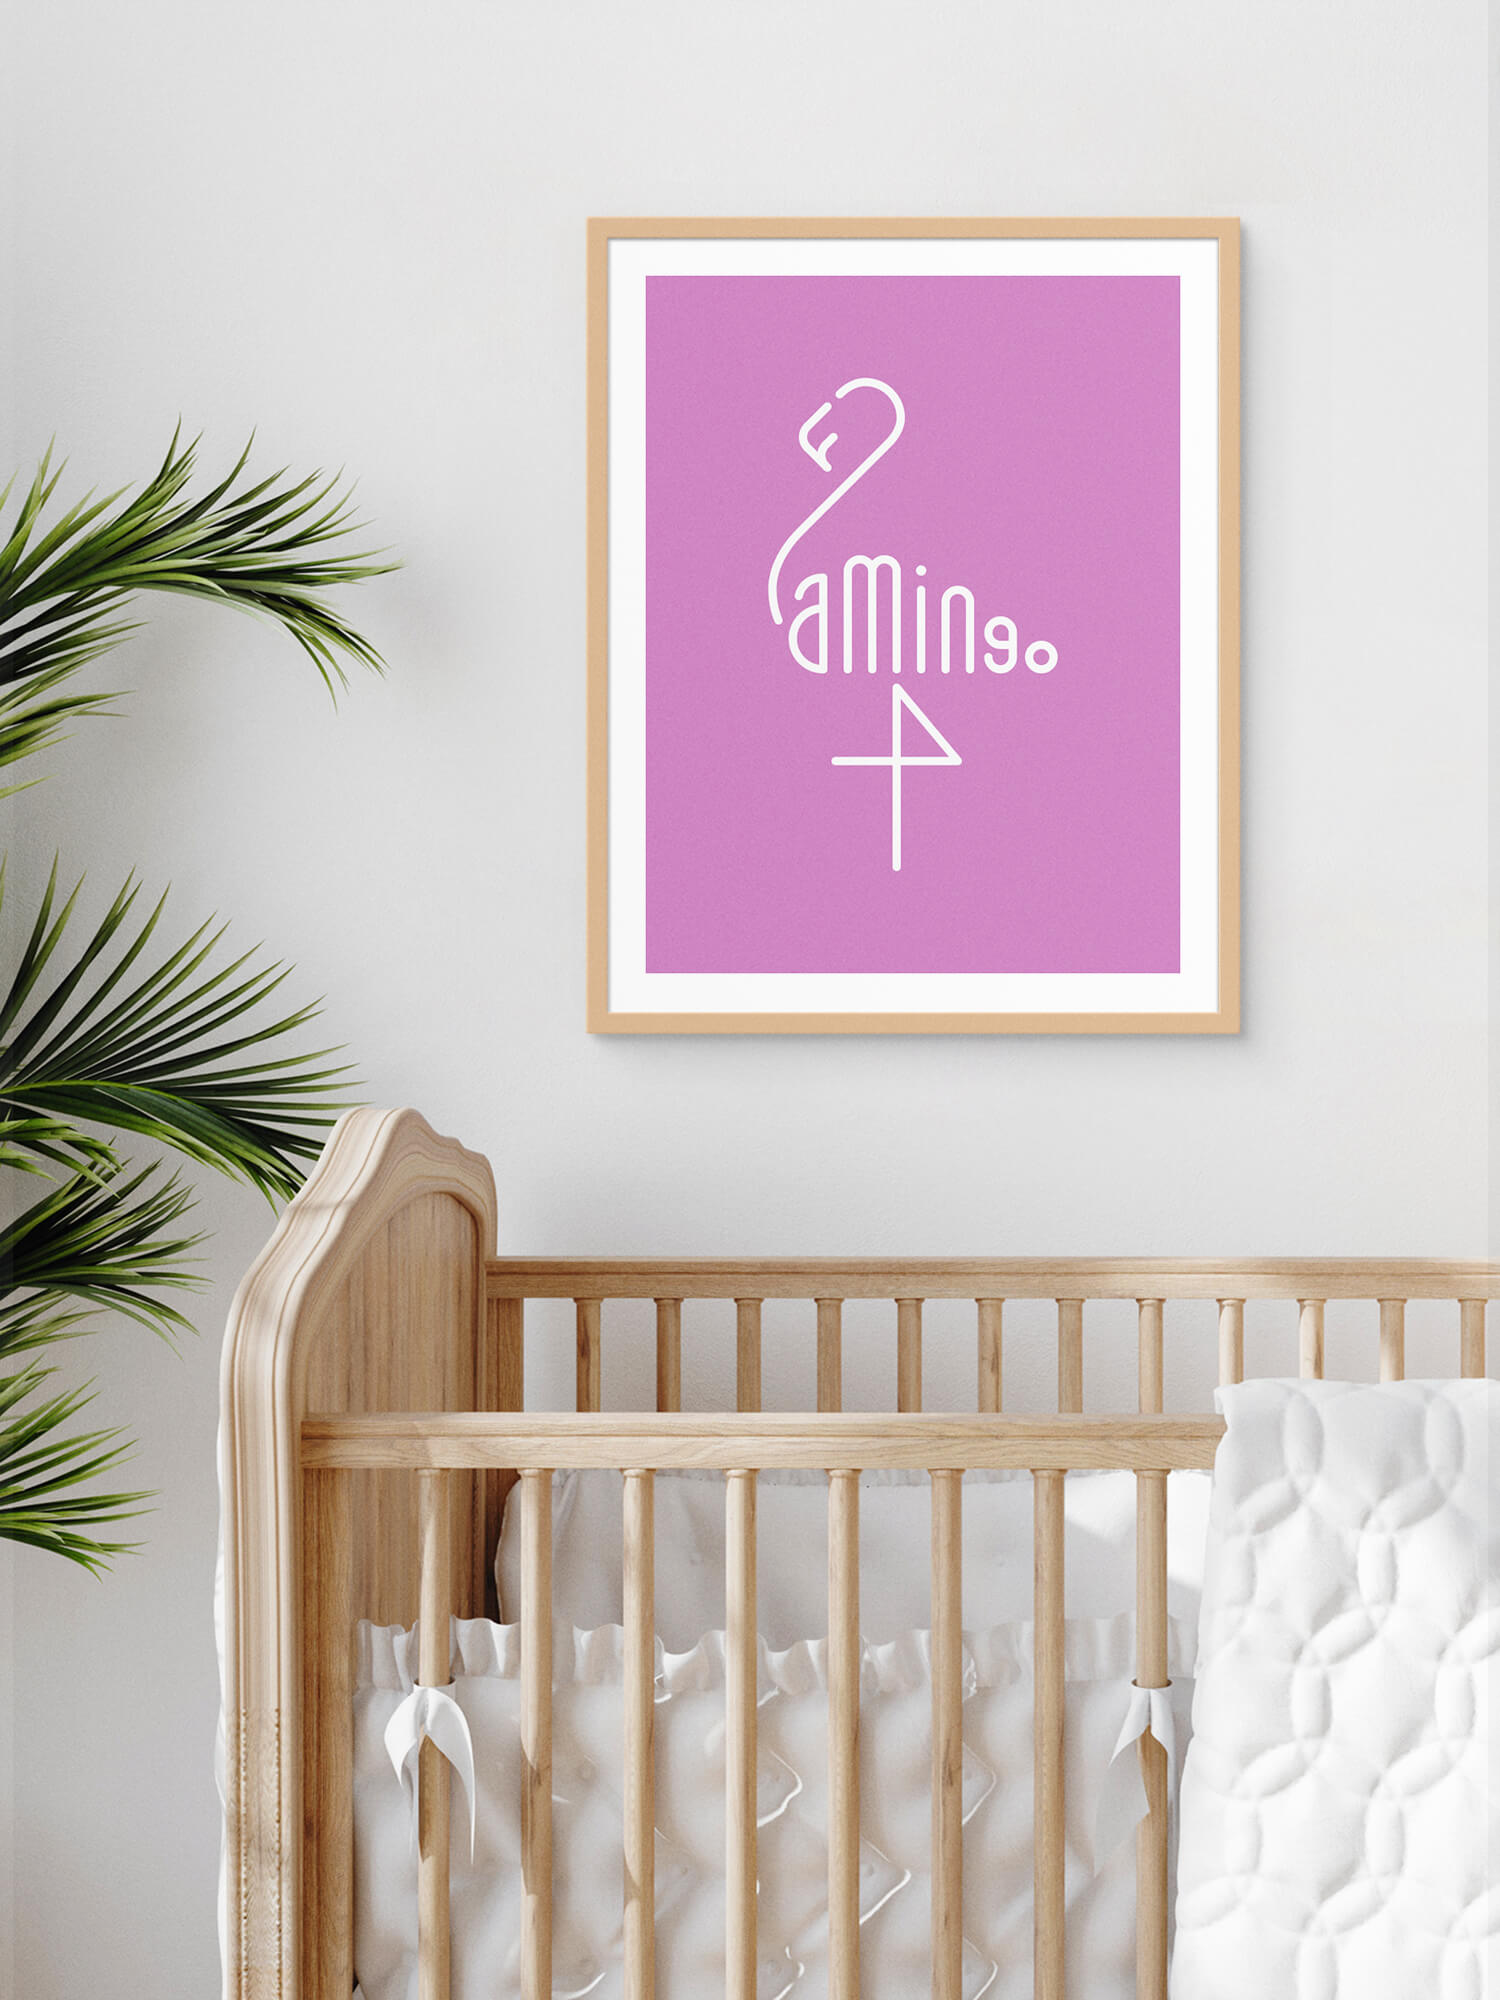 Framed Word Animals print displaying the illustration of a flamingo on the wall of a babies room